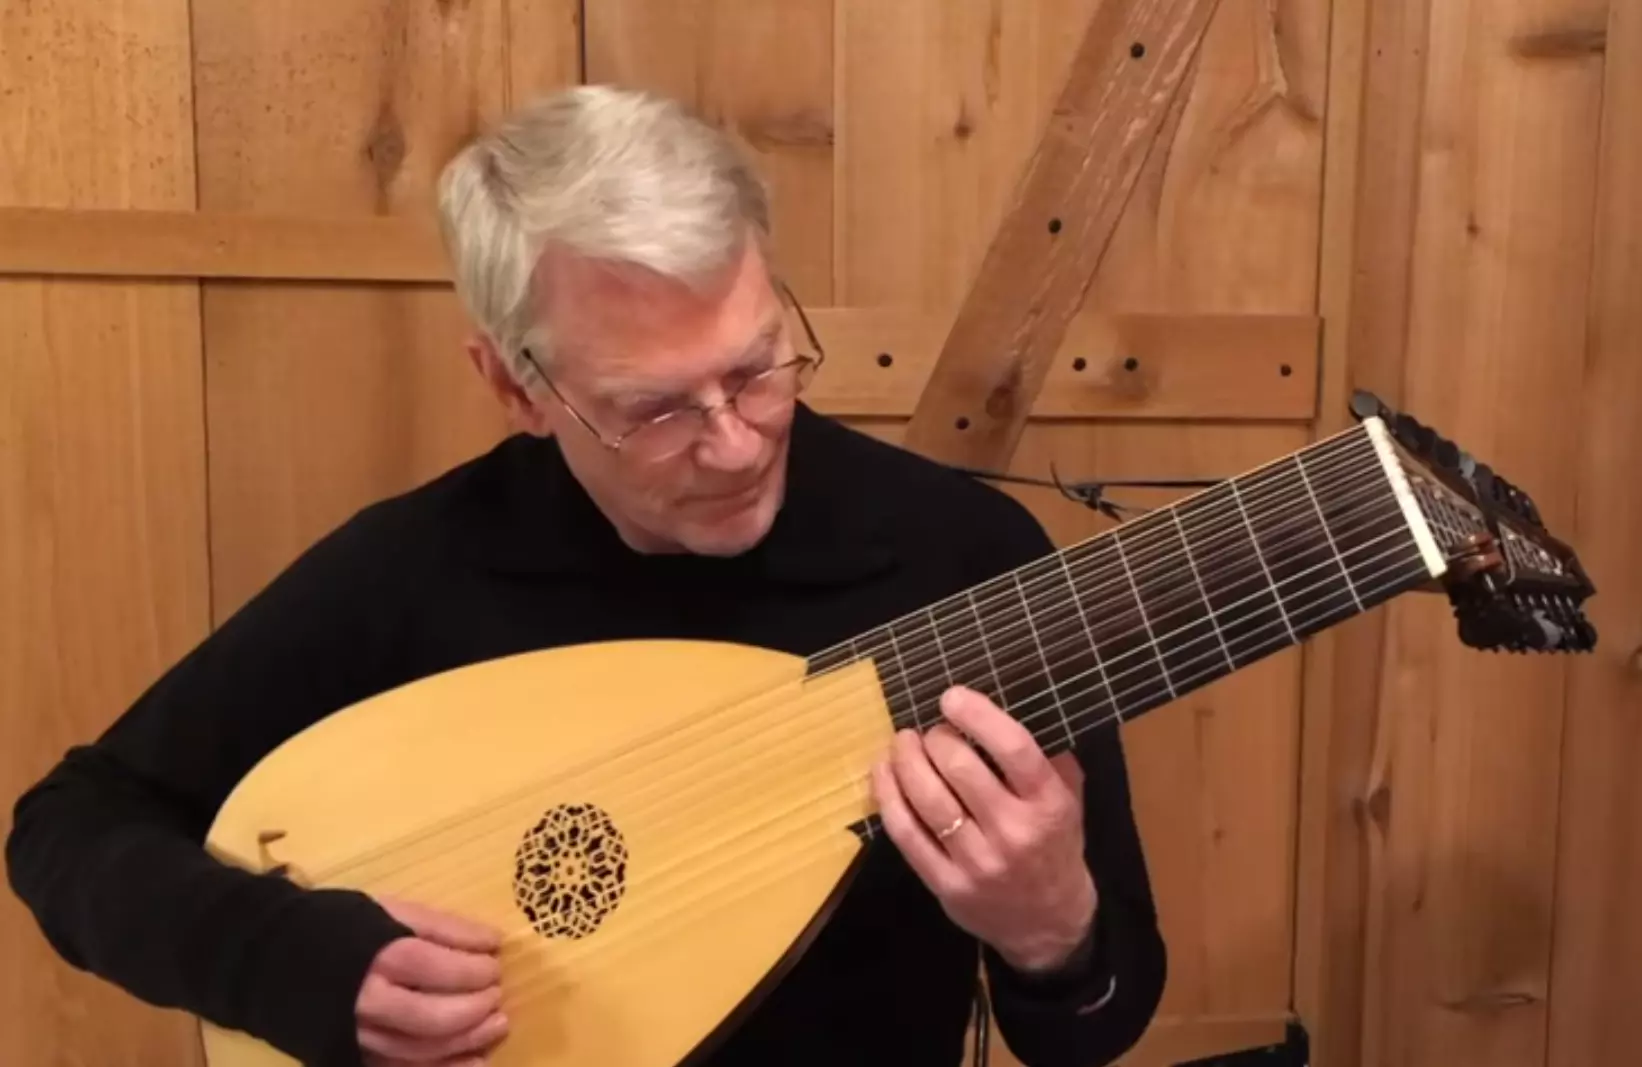 Classic Rock Songs Played on a 24-string Baroque Lute